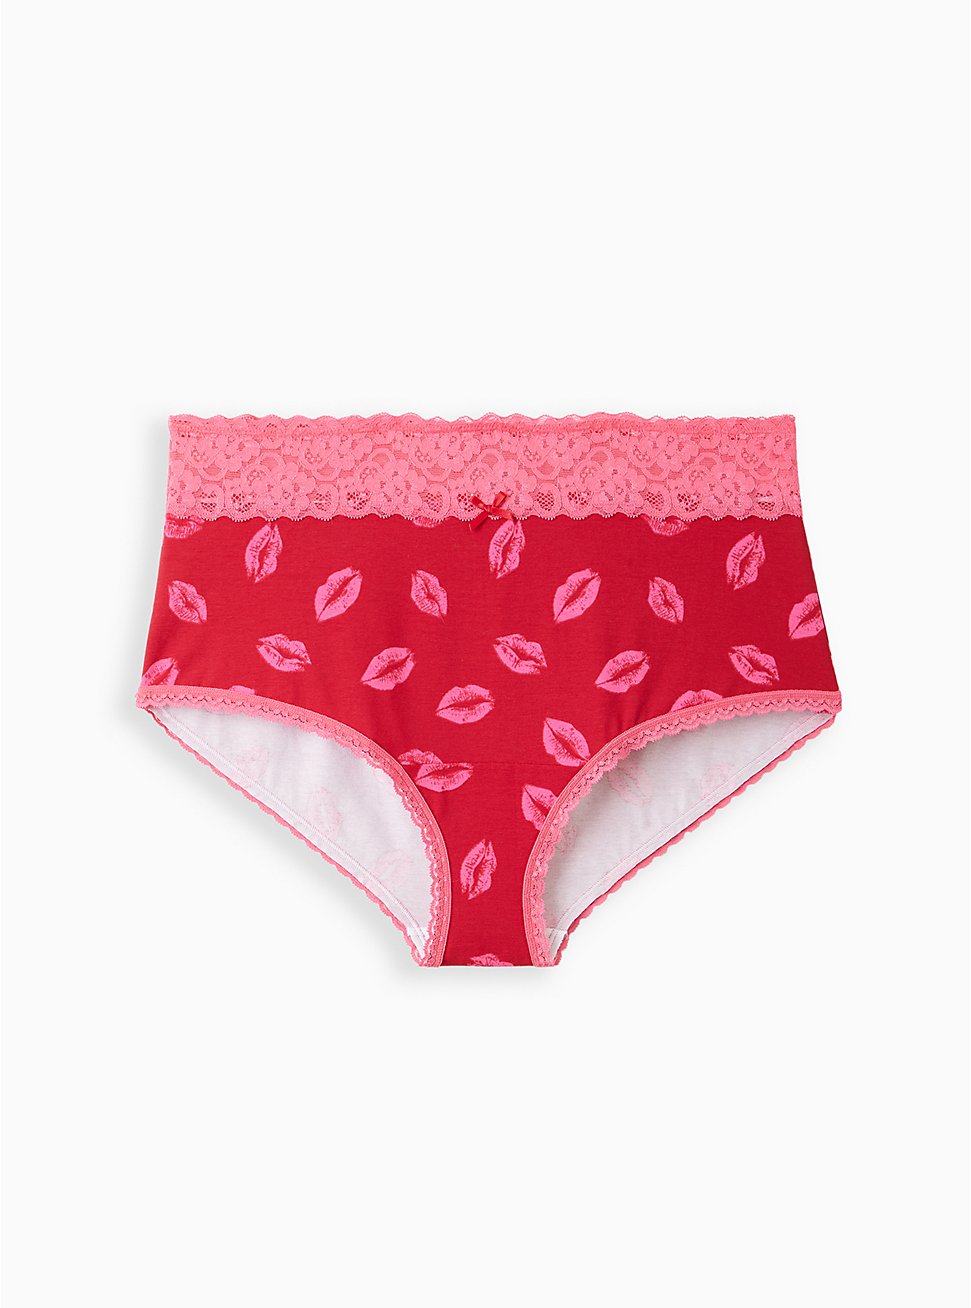 Wide Lace Trim Brief Panty - Cotton Lips Red, HOLIDAY LIPS- RED, hi-res